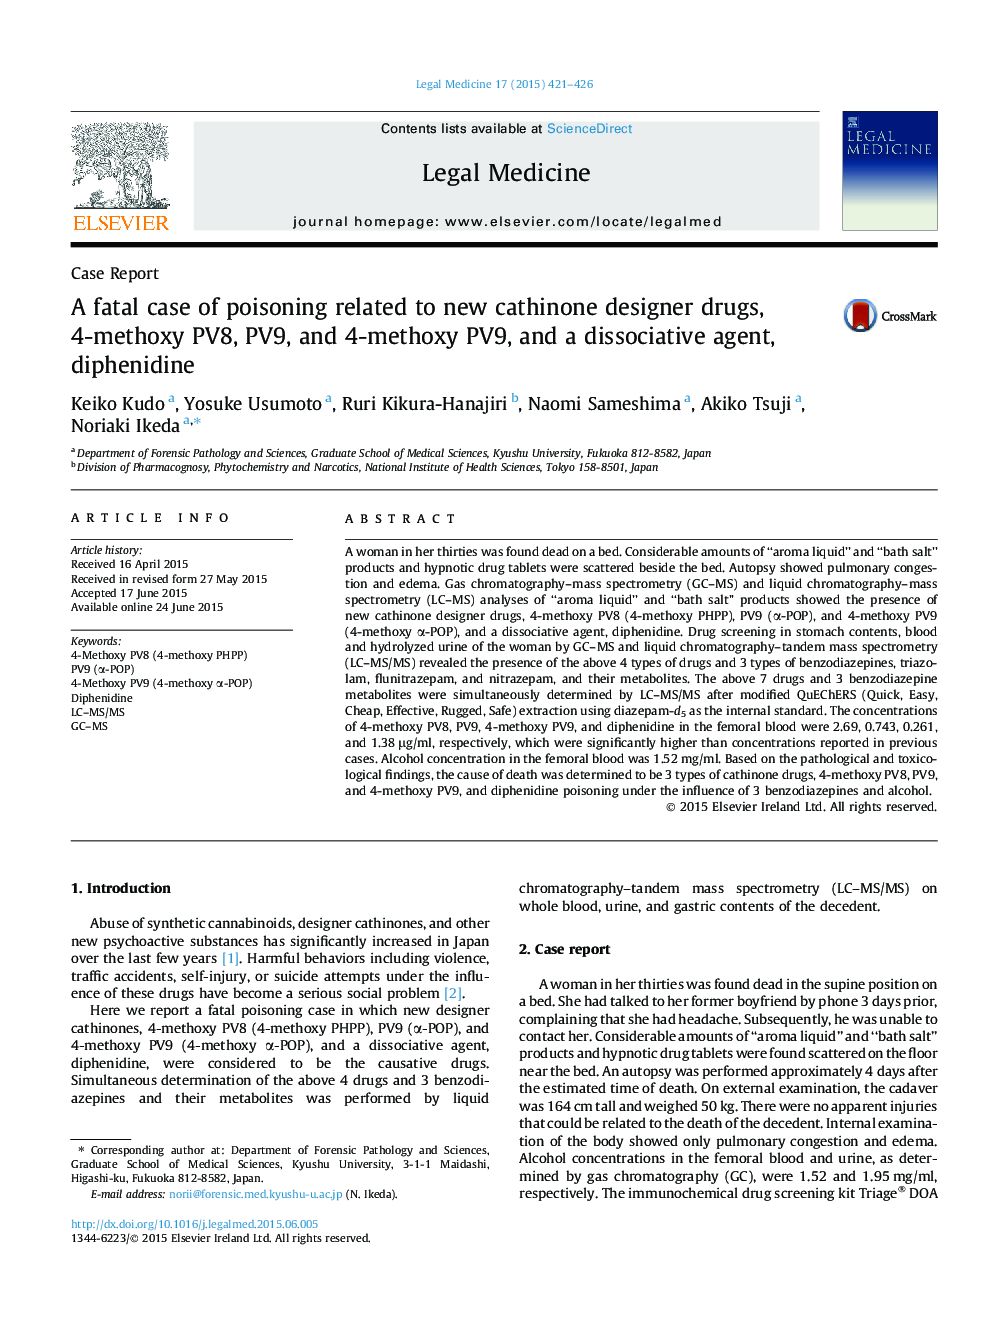 A fatal case of poisoning related to new cathinone designer drugs, 4-methoxy PV8, PV9, and 4-methoxy PV9, and a dissociative agent, diphenidine